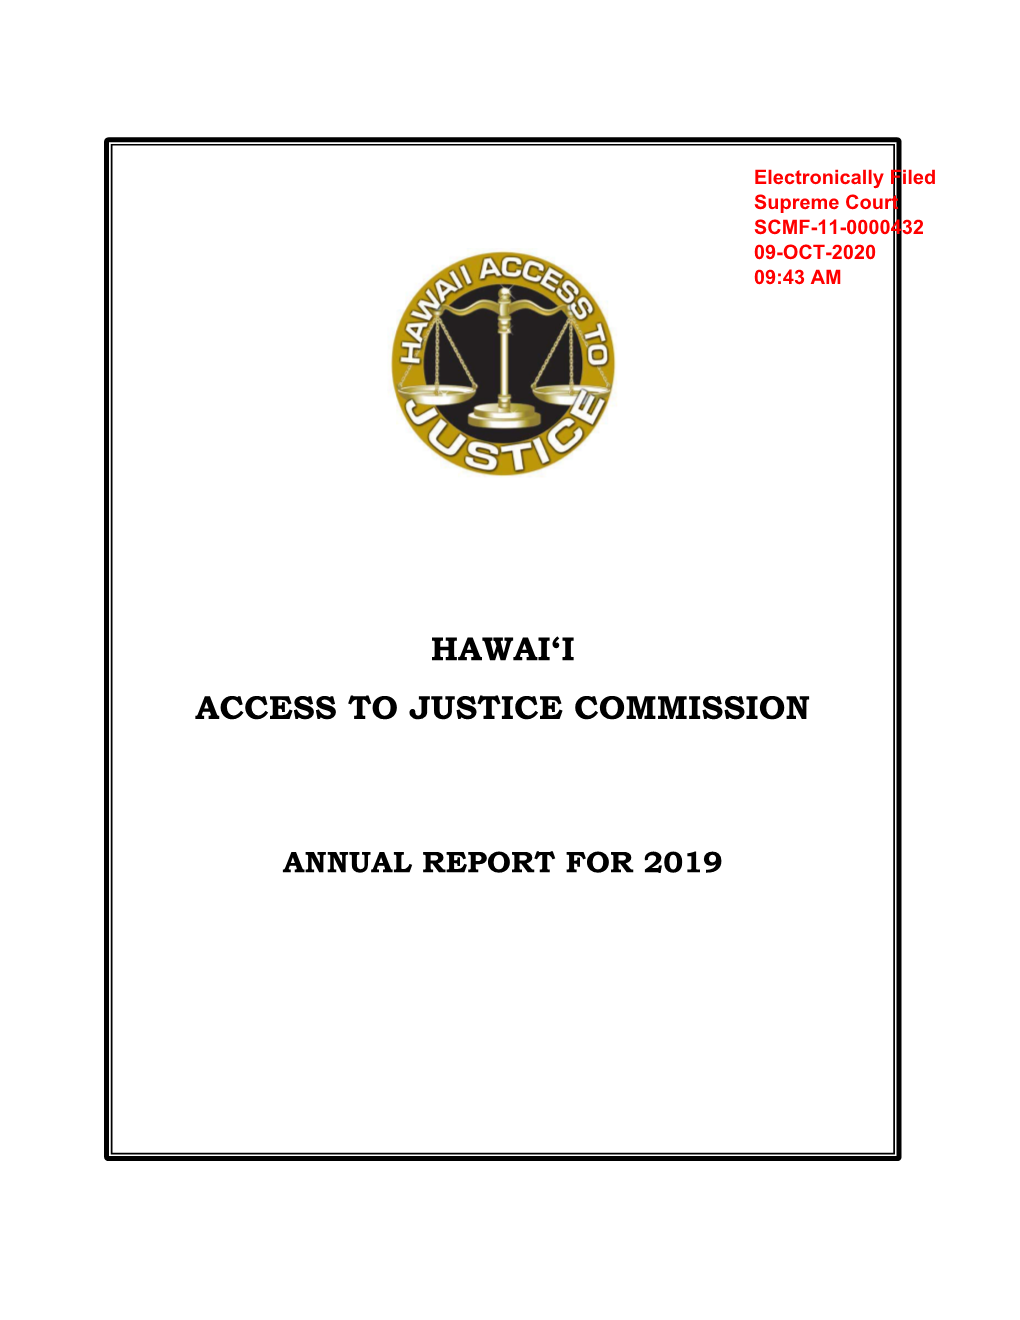 Hawai'i Access to Justice Commission (“Commission”) Hosted the Seventh Annual Pro Bono Celebration11 on Thursday, October 24, 2019 at the Hawai'i Supreme Court